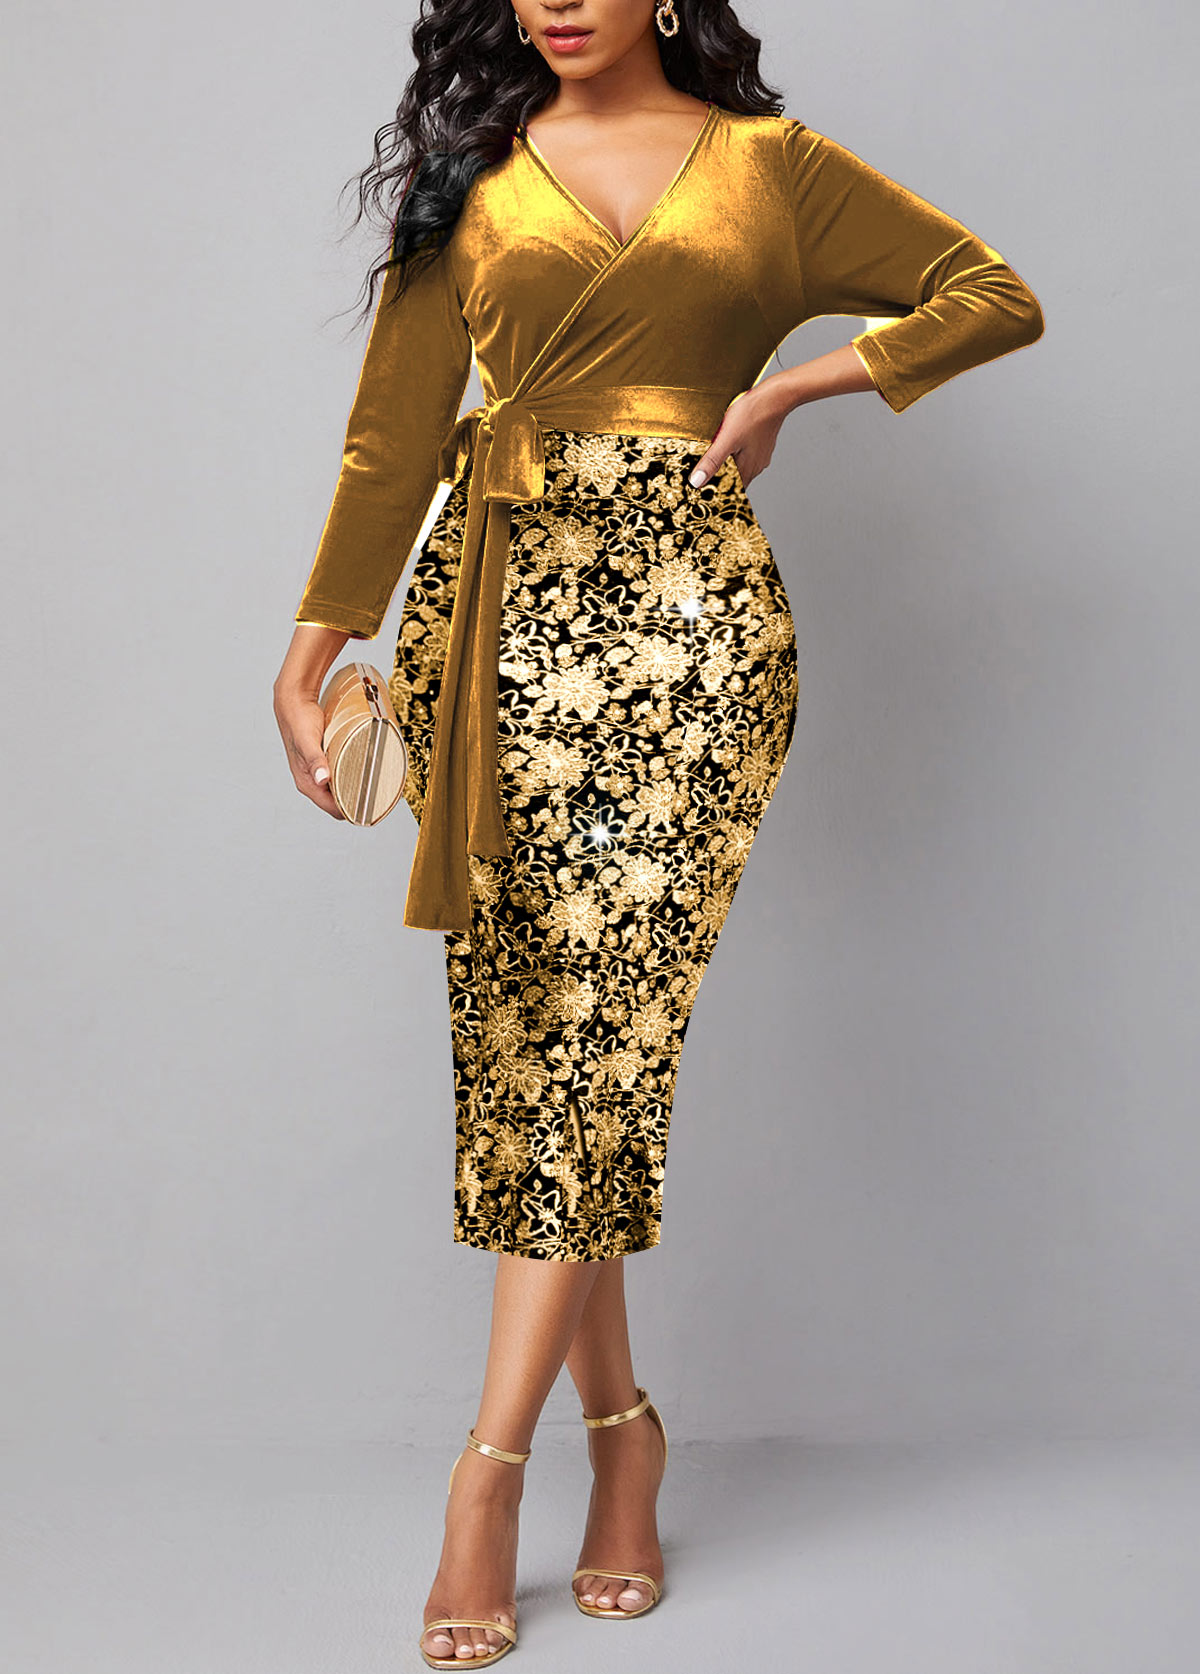 ROTITA New Year Hot Stamping Floral Print Golden Belted Dress